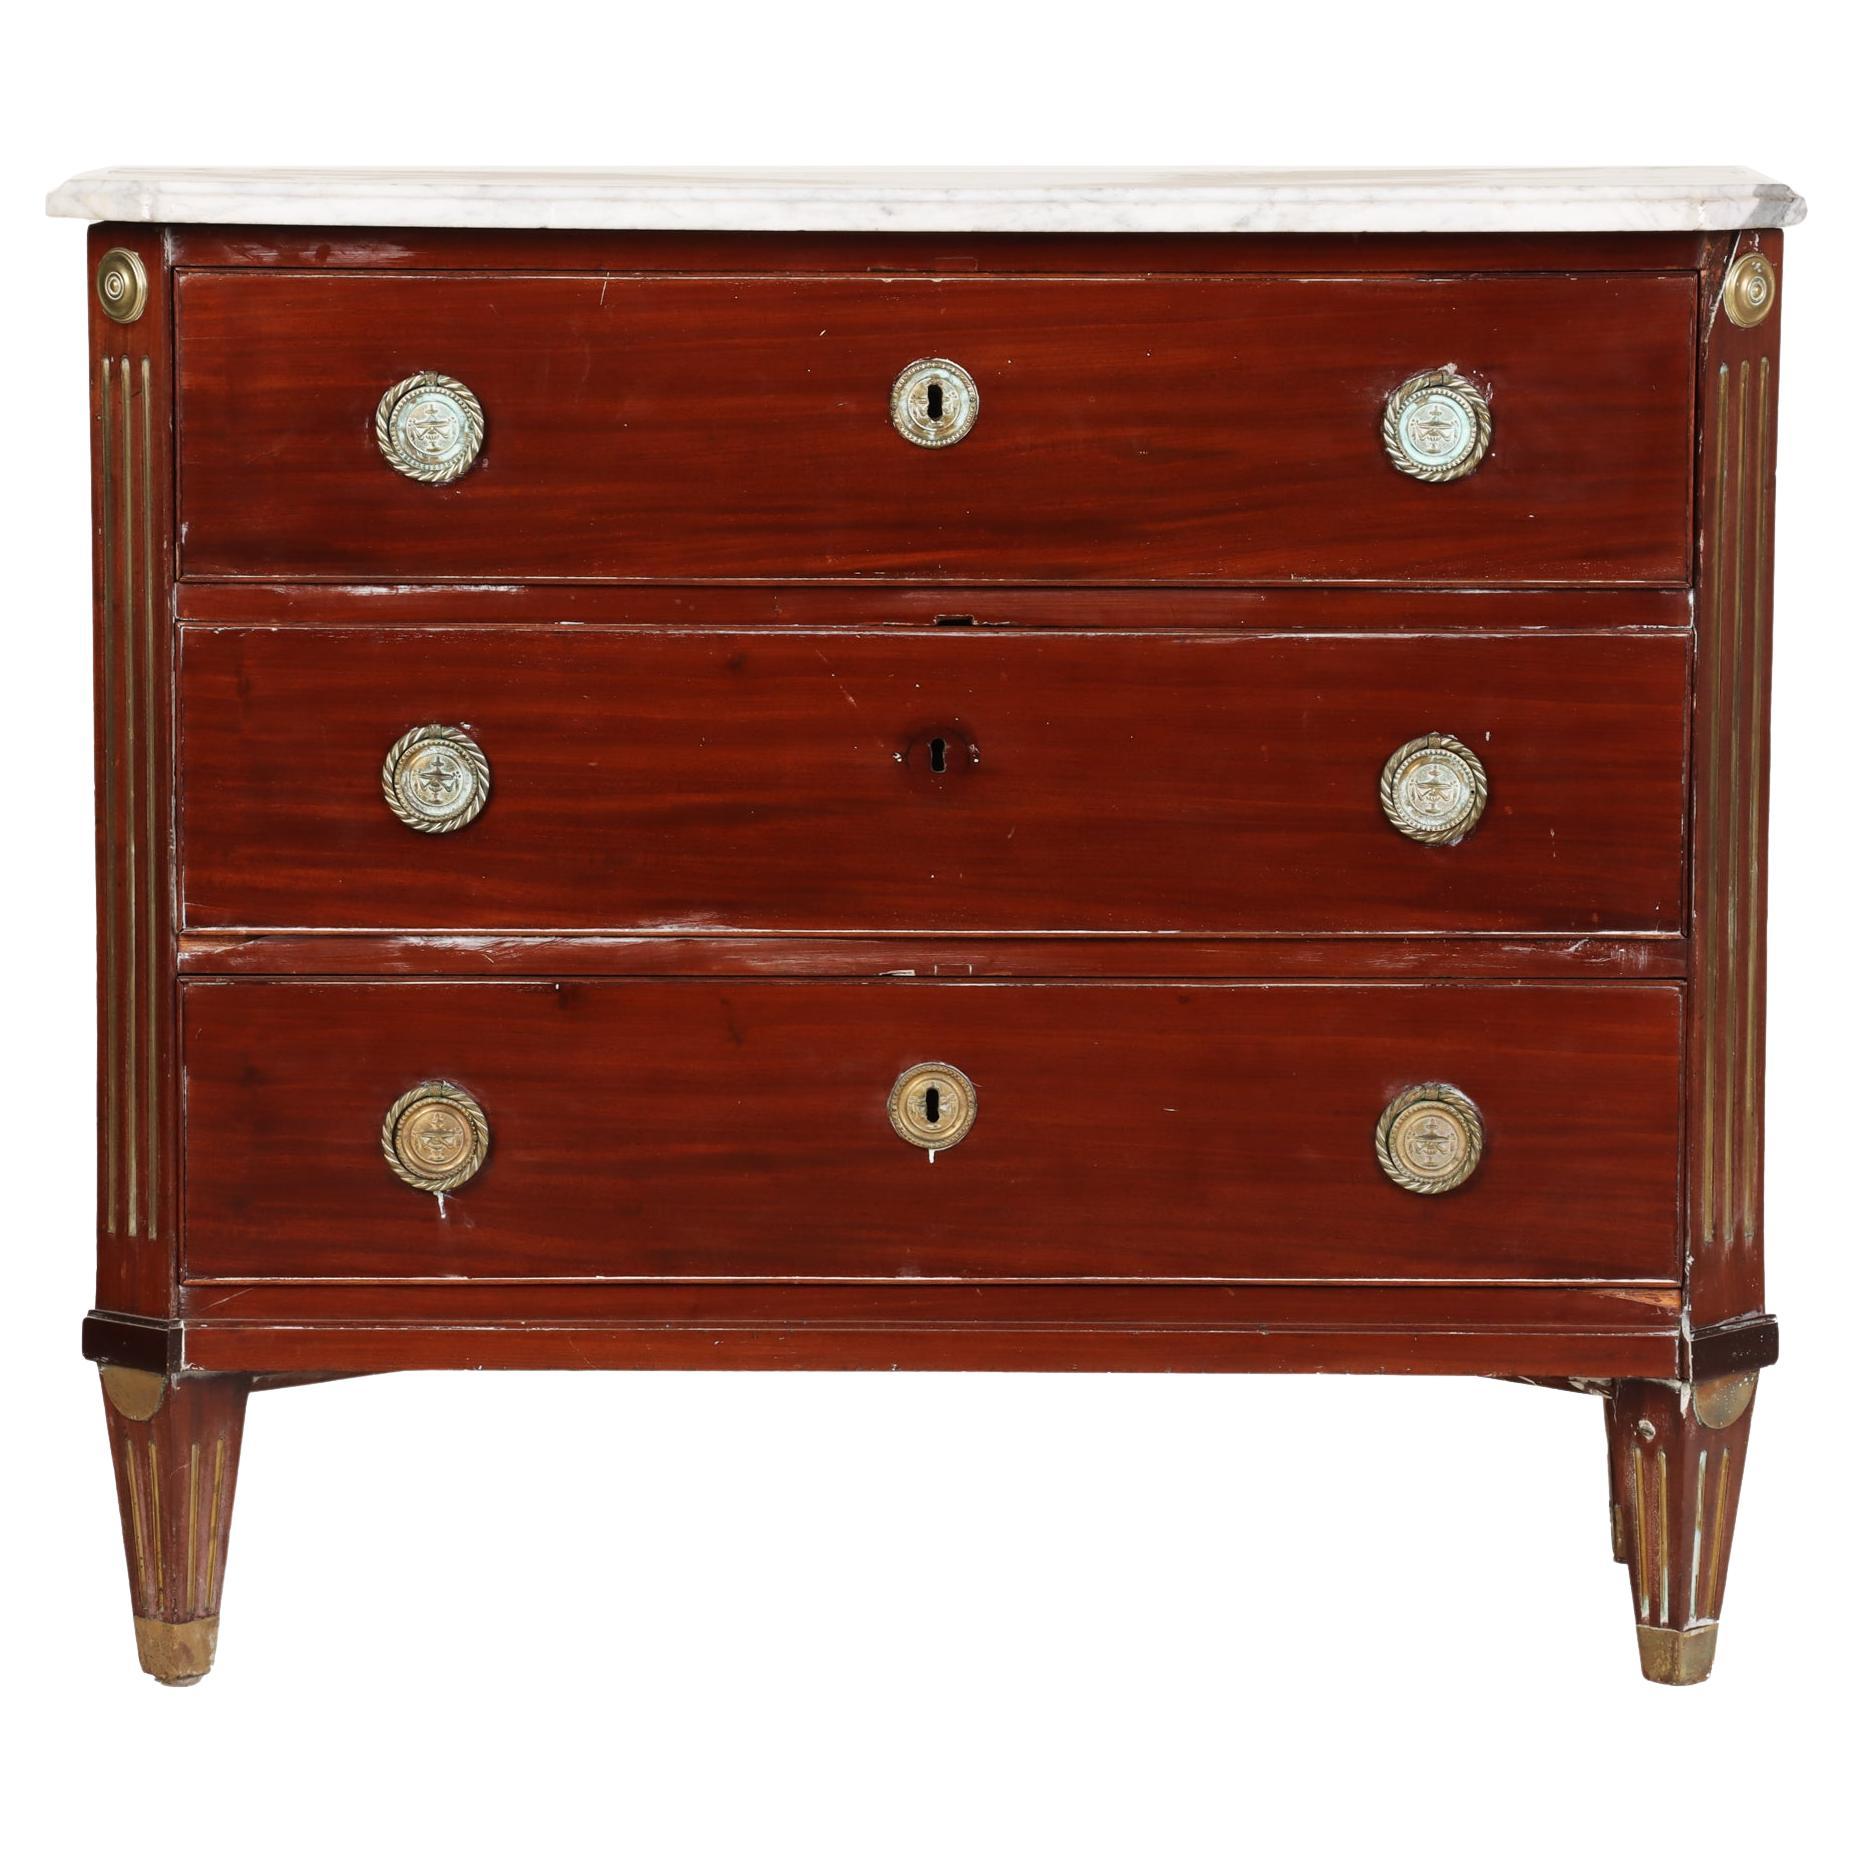 Russian Neoclassical Brass Mounted Mahogany Commode, Early Nineteenth Century